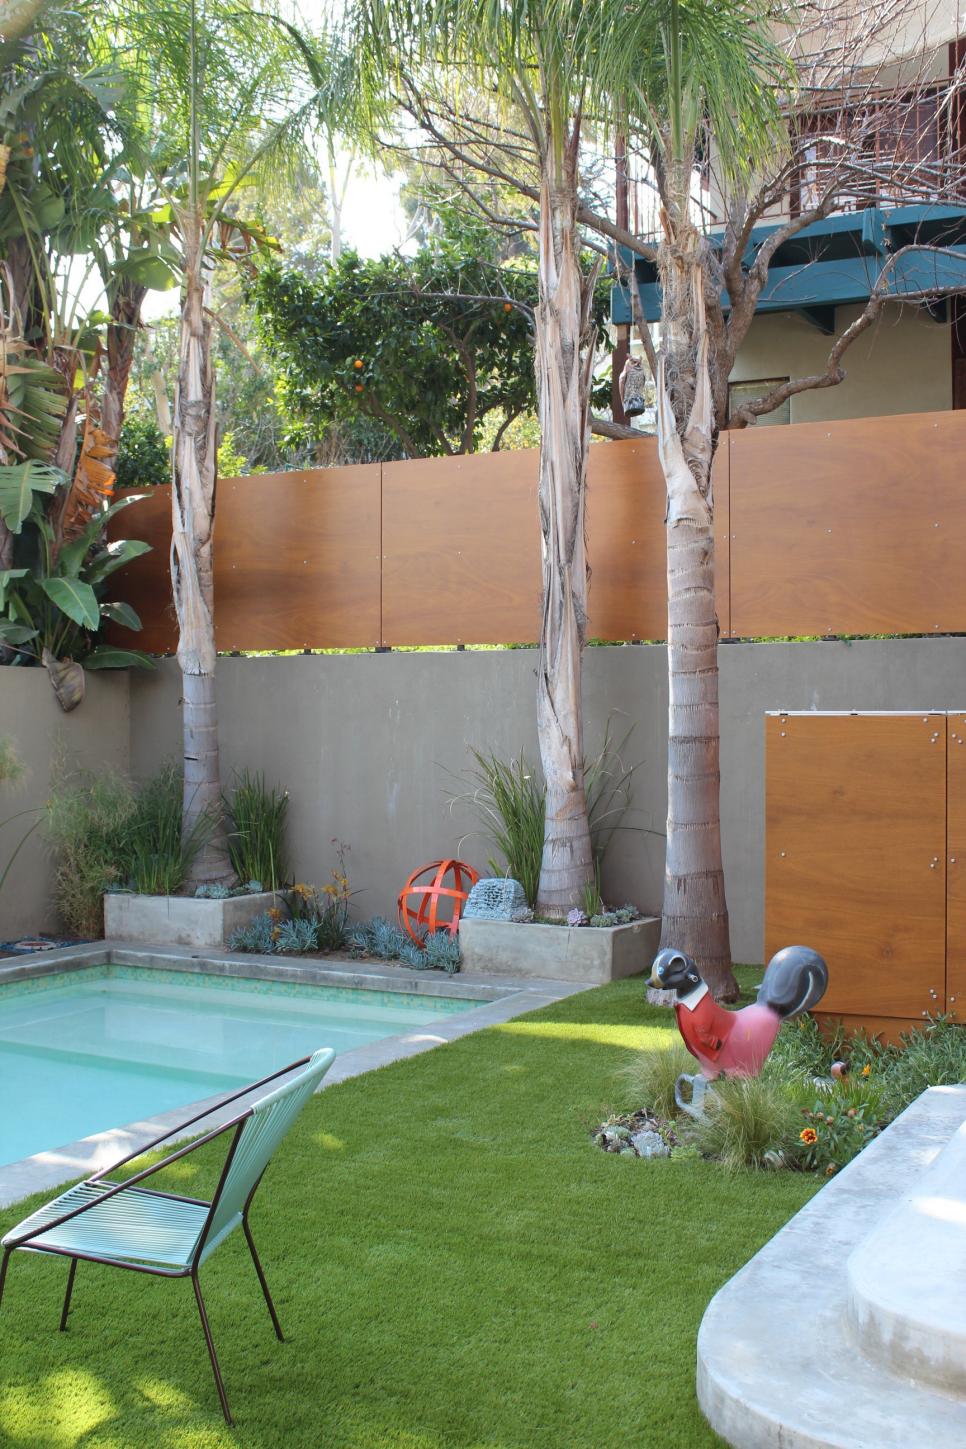 15 Fascinating Modern Fence Ideas to Style Your Backyard